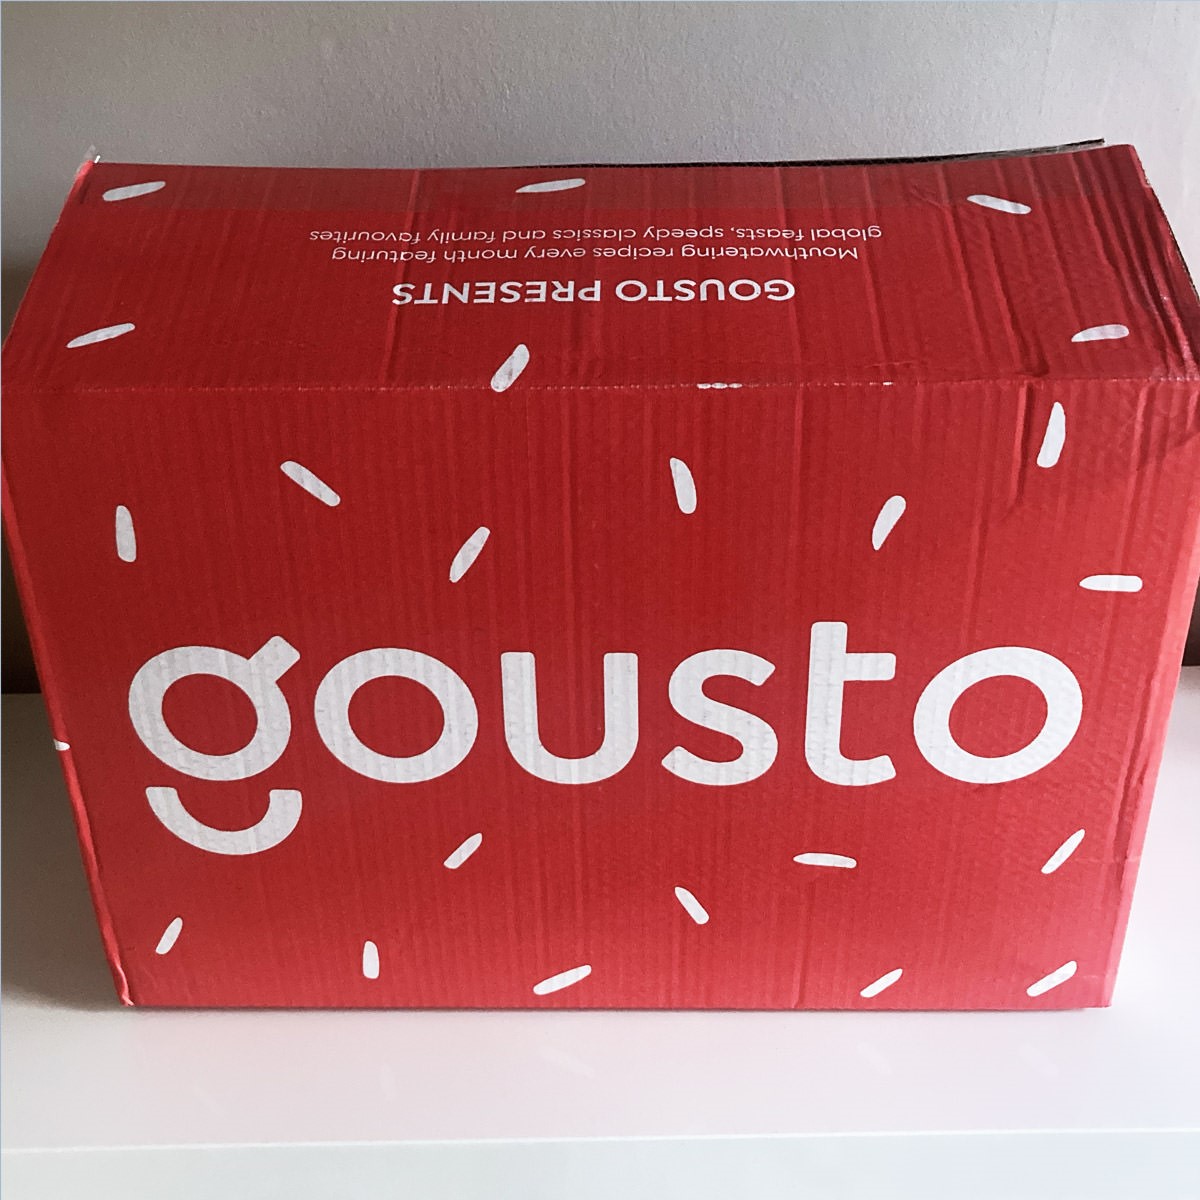 Superfried – Walk the Talk. Testing eco credentials of Gousto – image of the box delivered. Continuing my path towards eco living. 